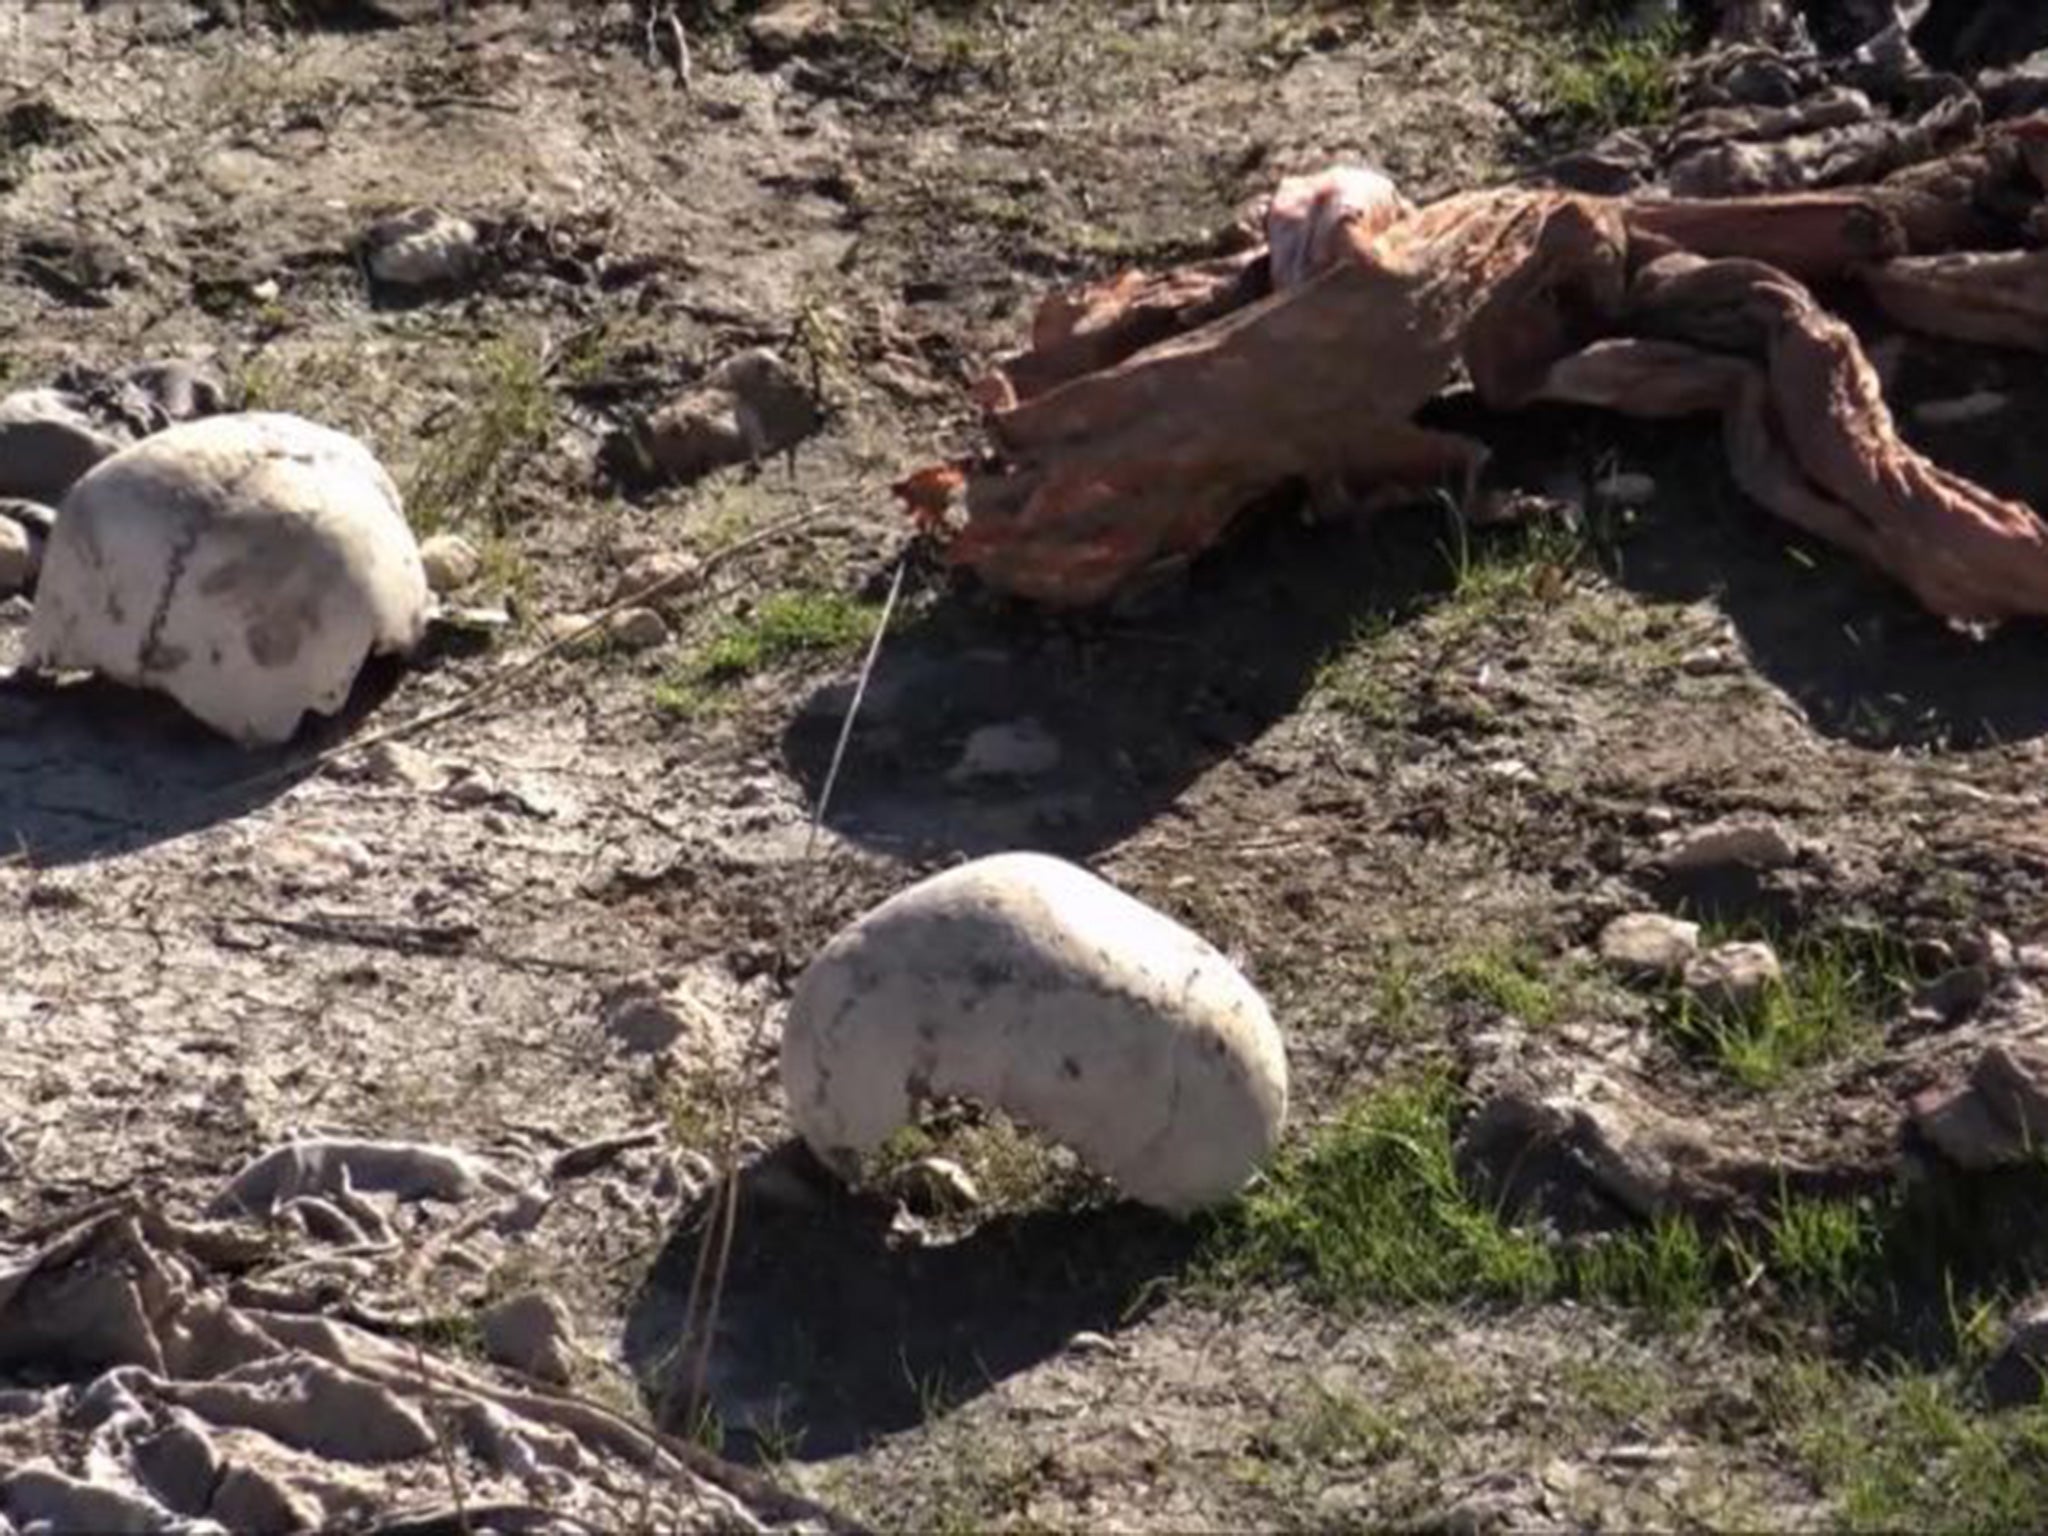 Skulls remain at the site of a purported mass grave in the city of Sinjar, northern Iraq after it was retaken from Islamic State militants